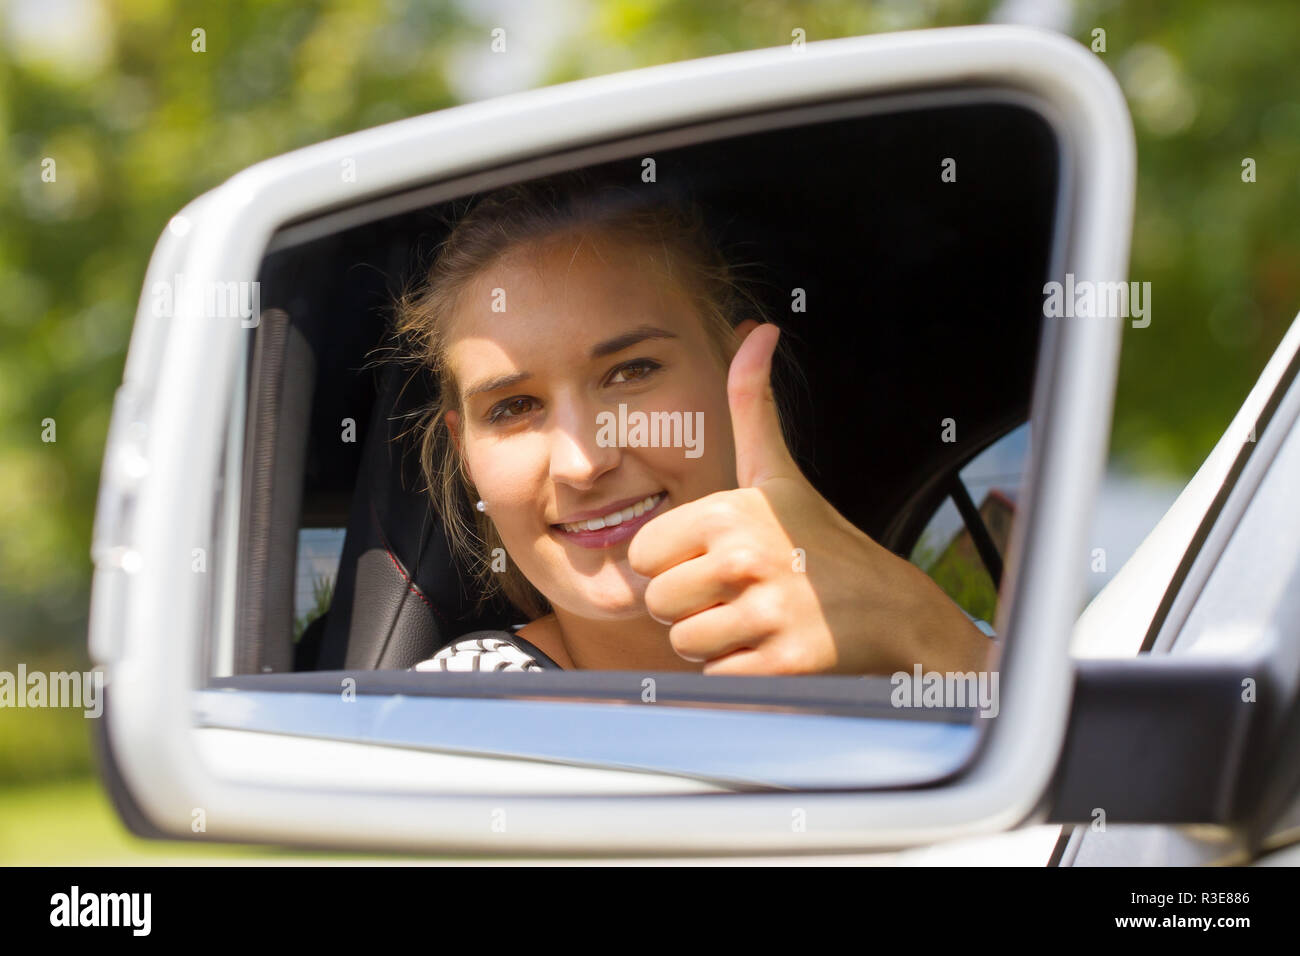 young female driver with thumb up Stock Photo